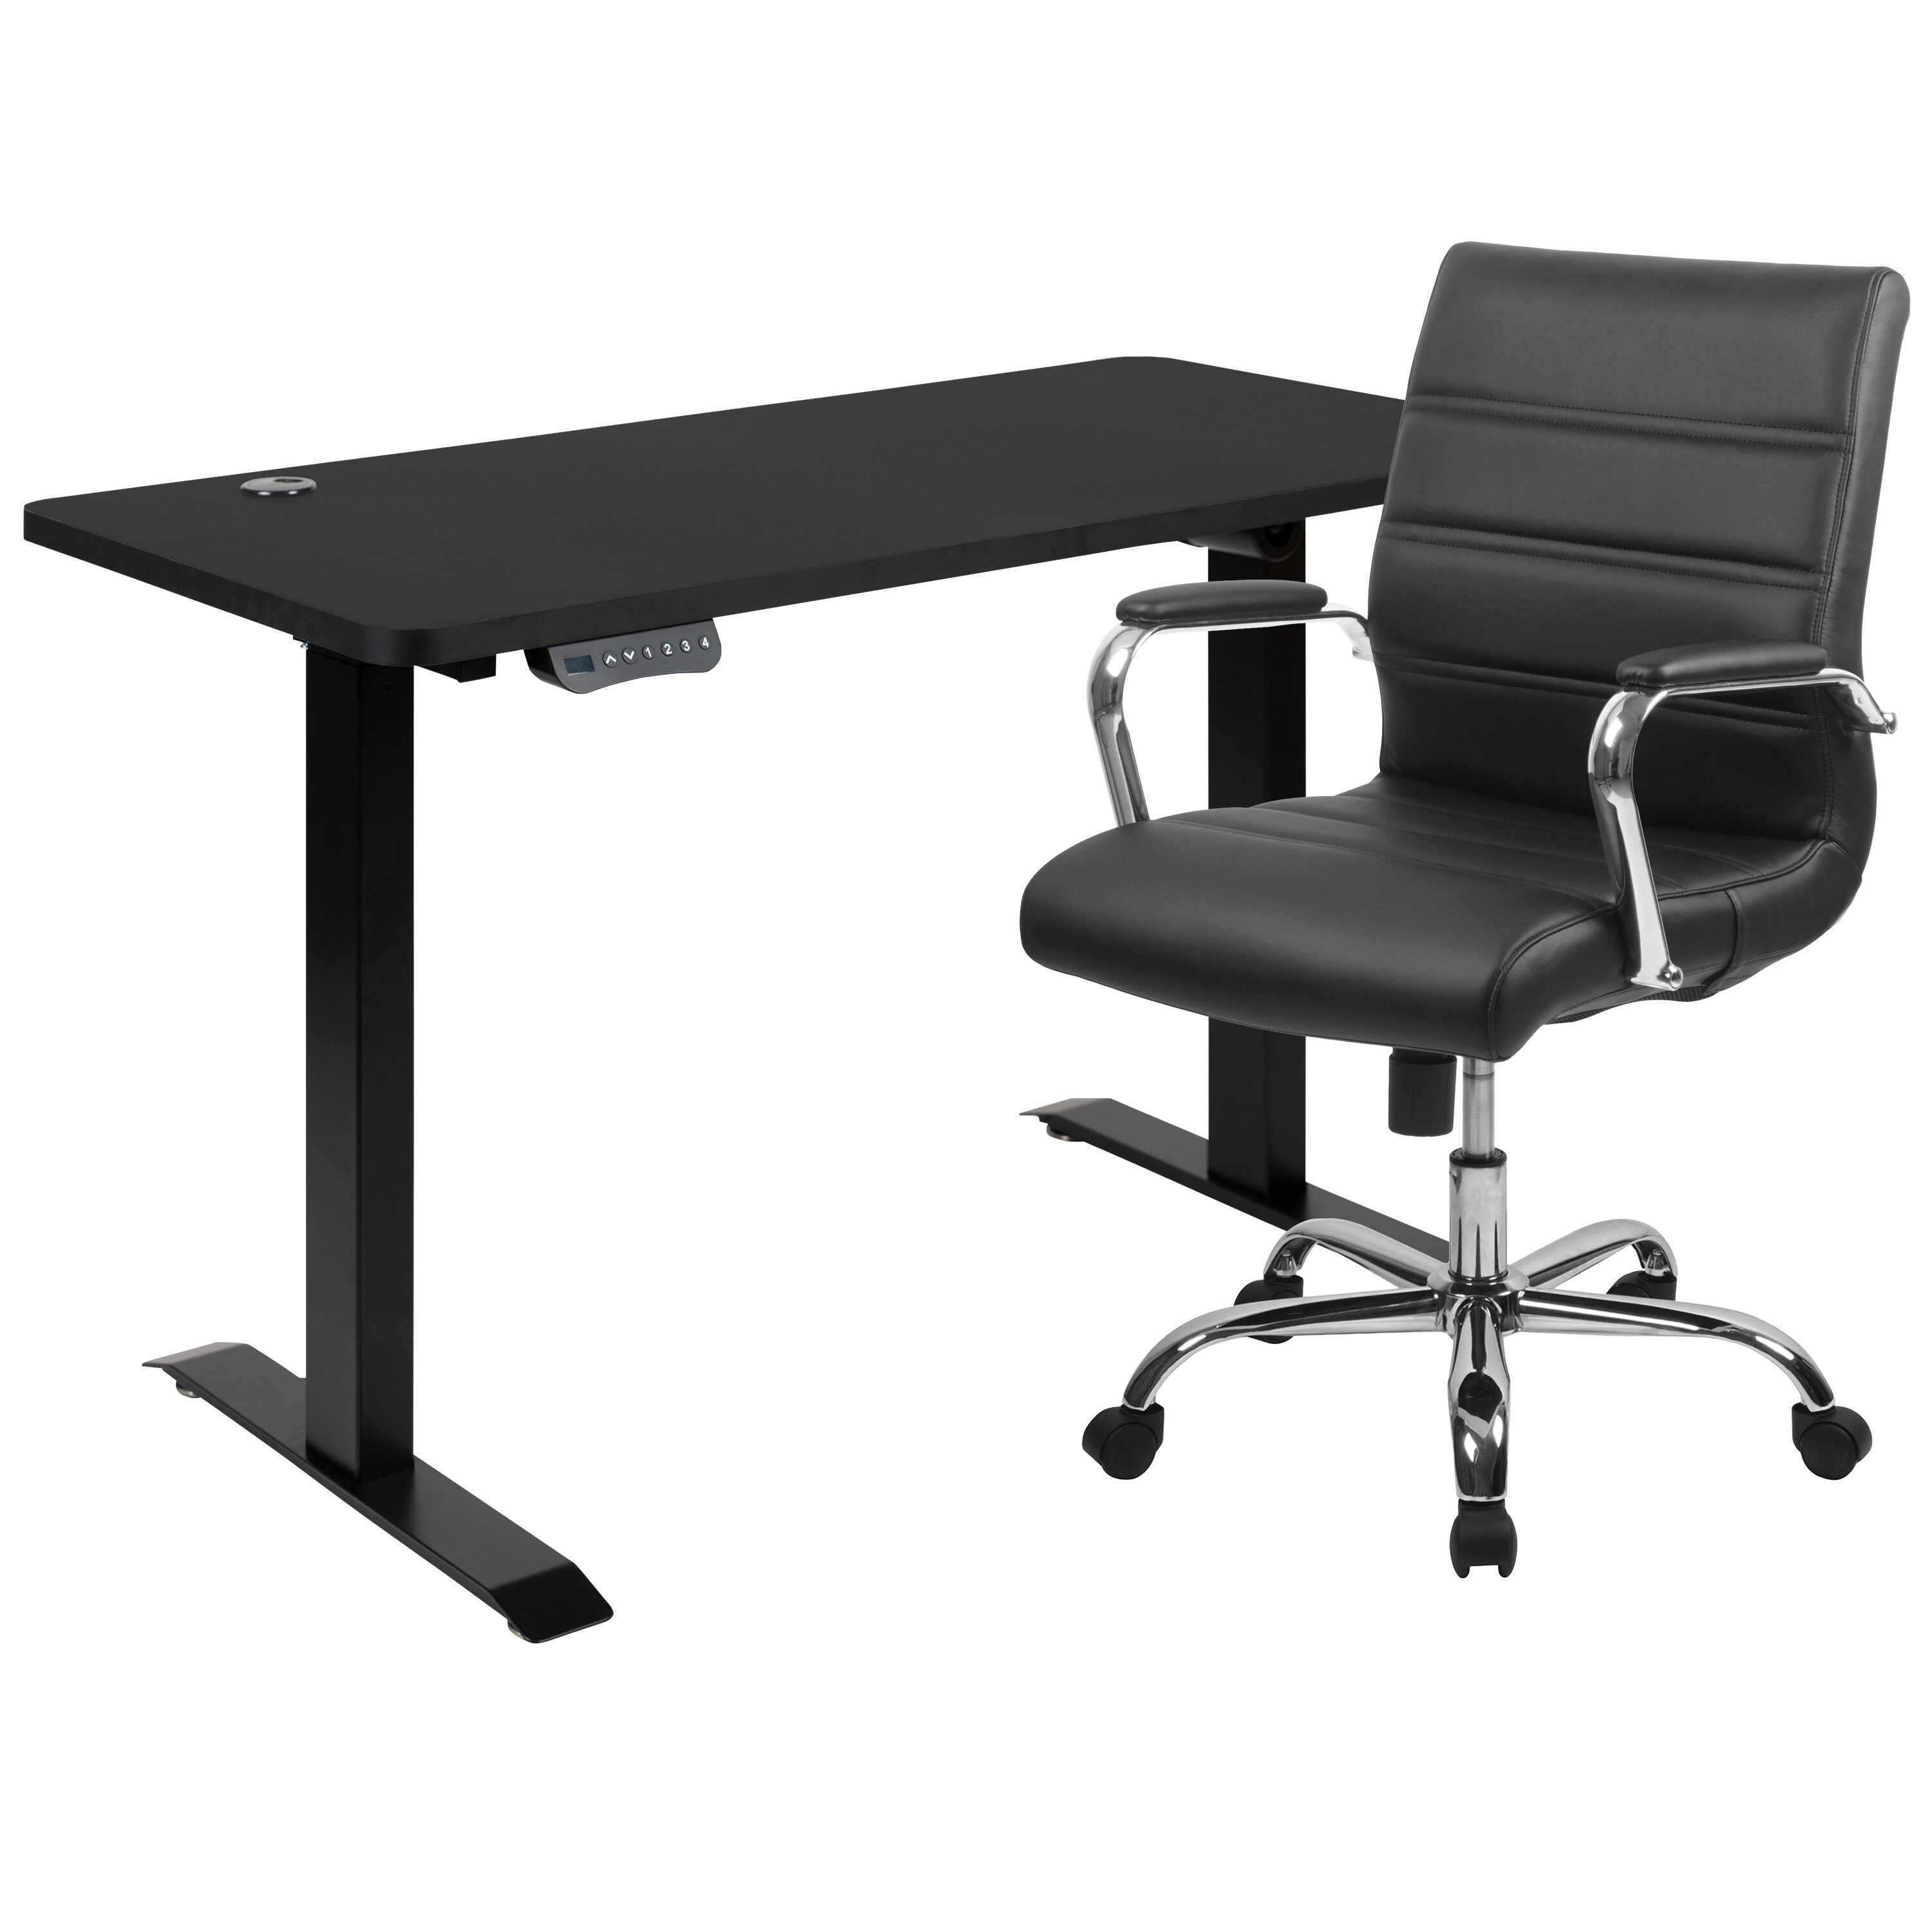 Executive Leather Office Chair Computer Desk Swivel Adjustable Lift Present Gift 